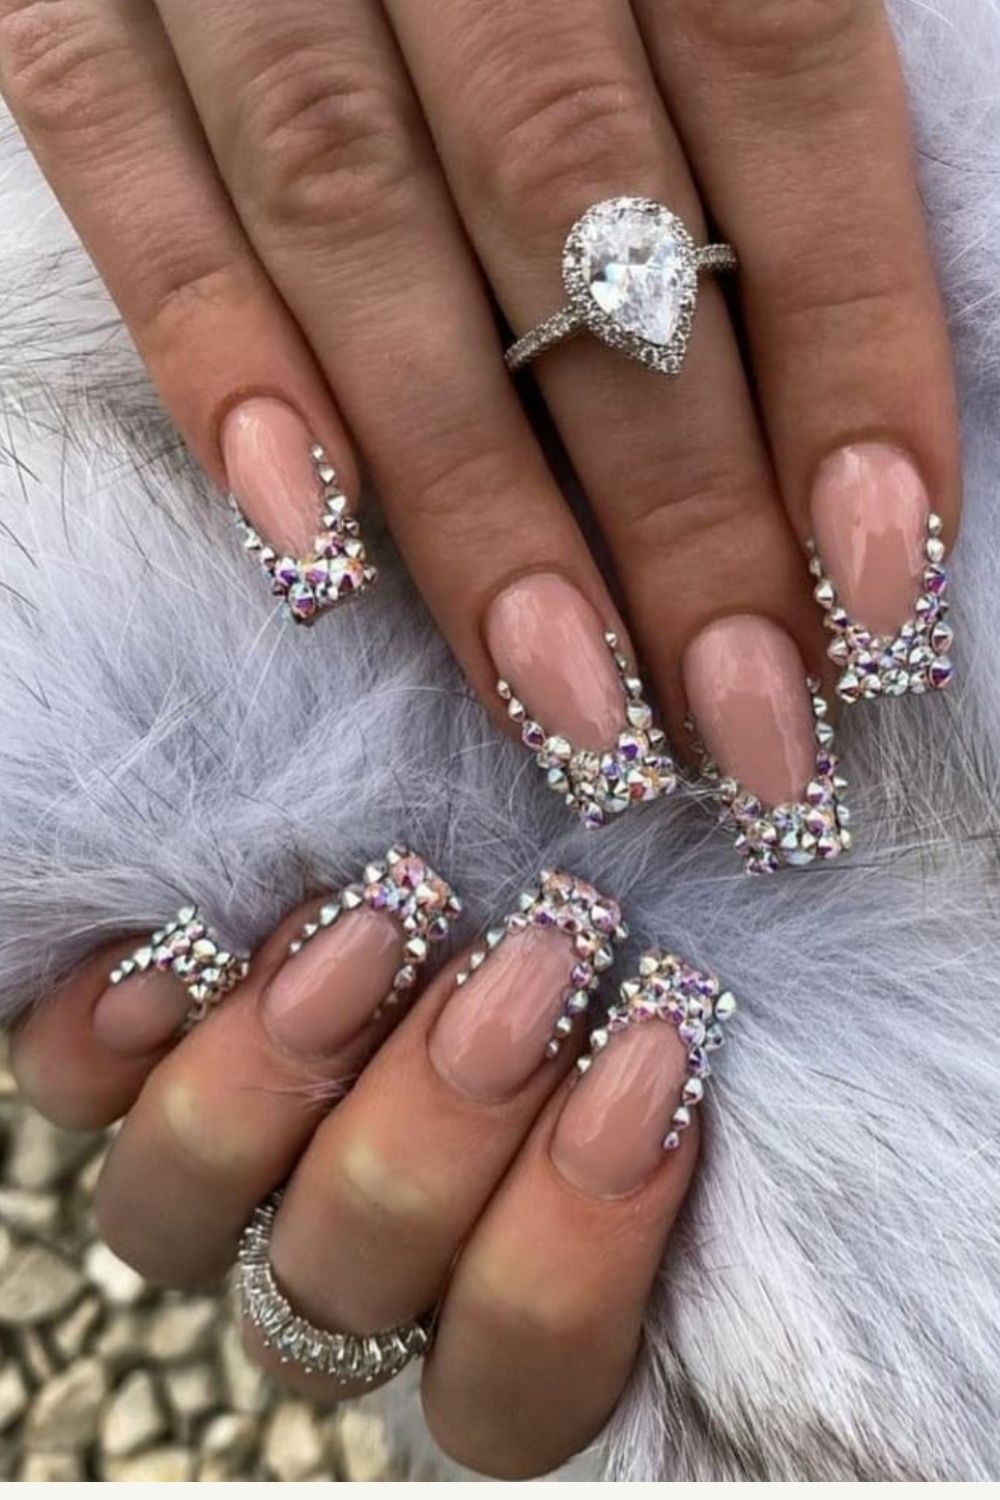 Acrylic Glitter coffin nails designs for Summer 2021!